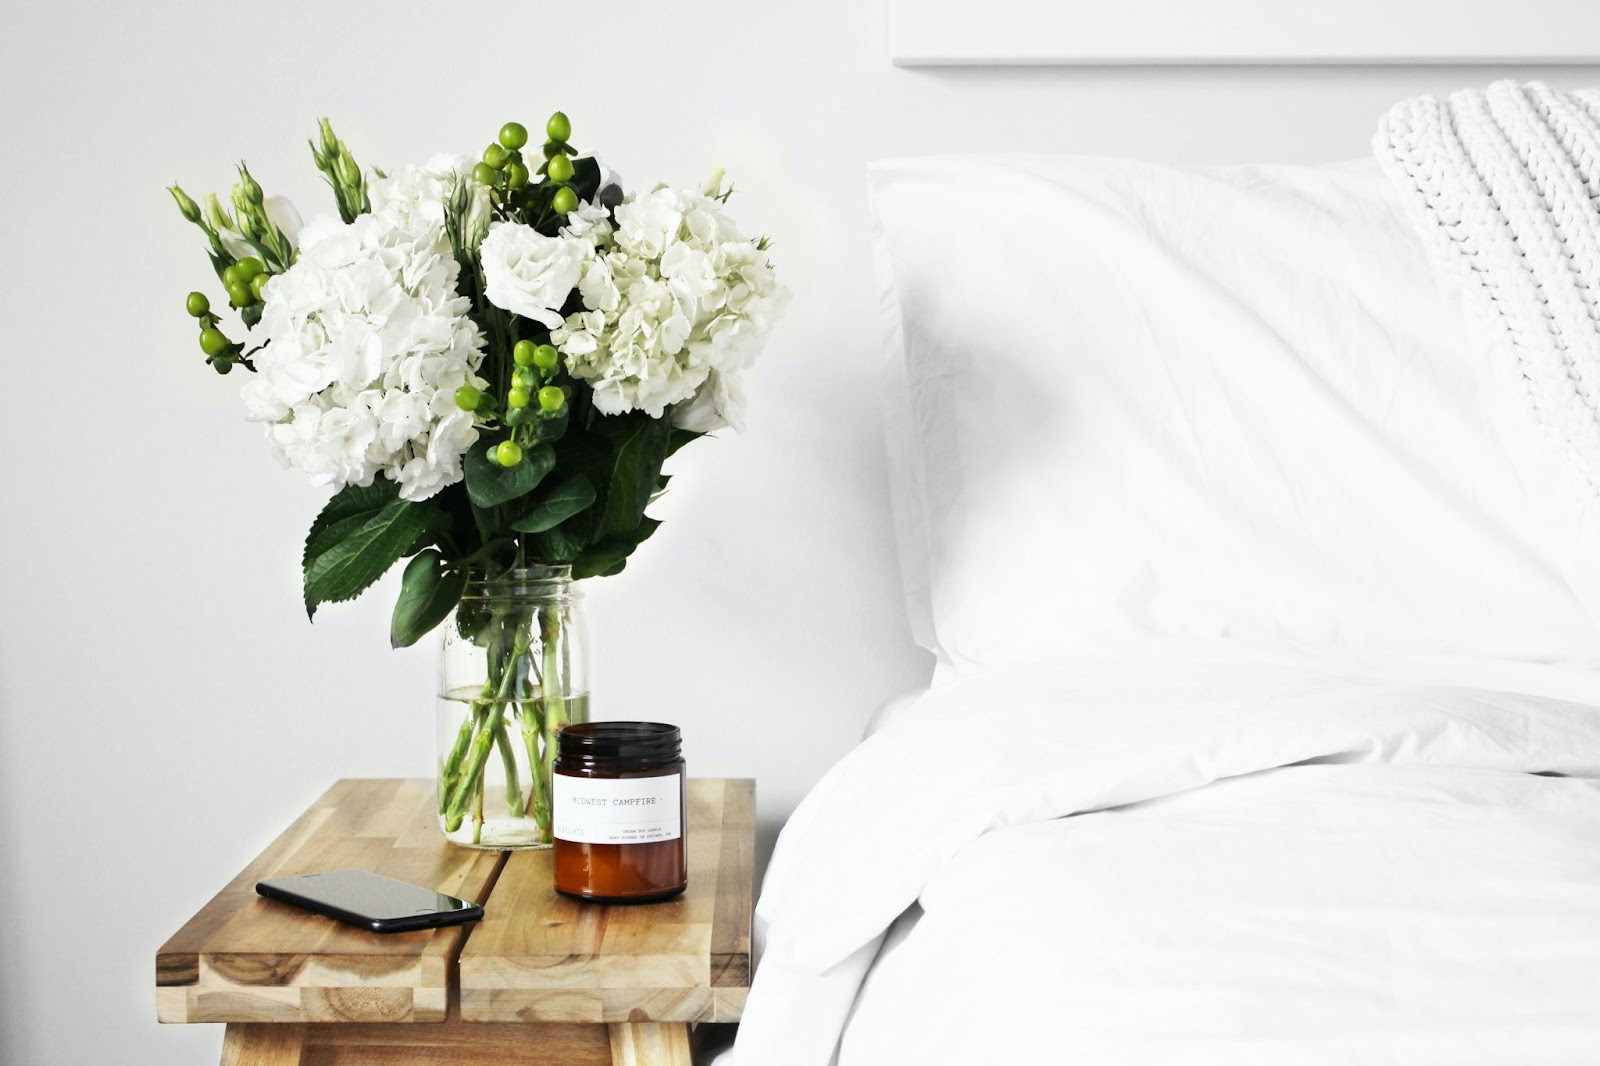 White flowers in a vase next to bedside table in bedroom